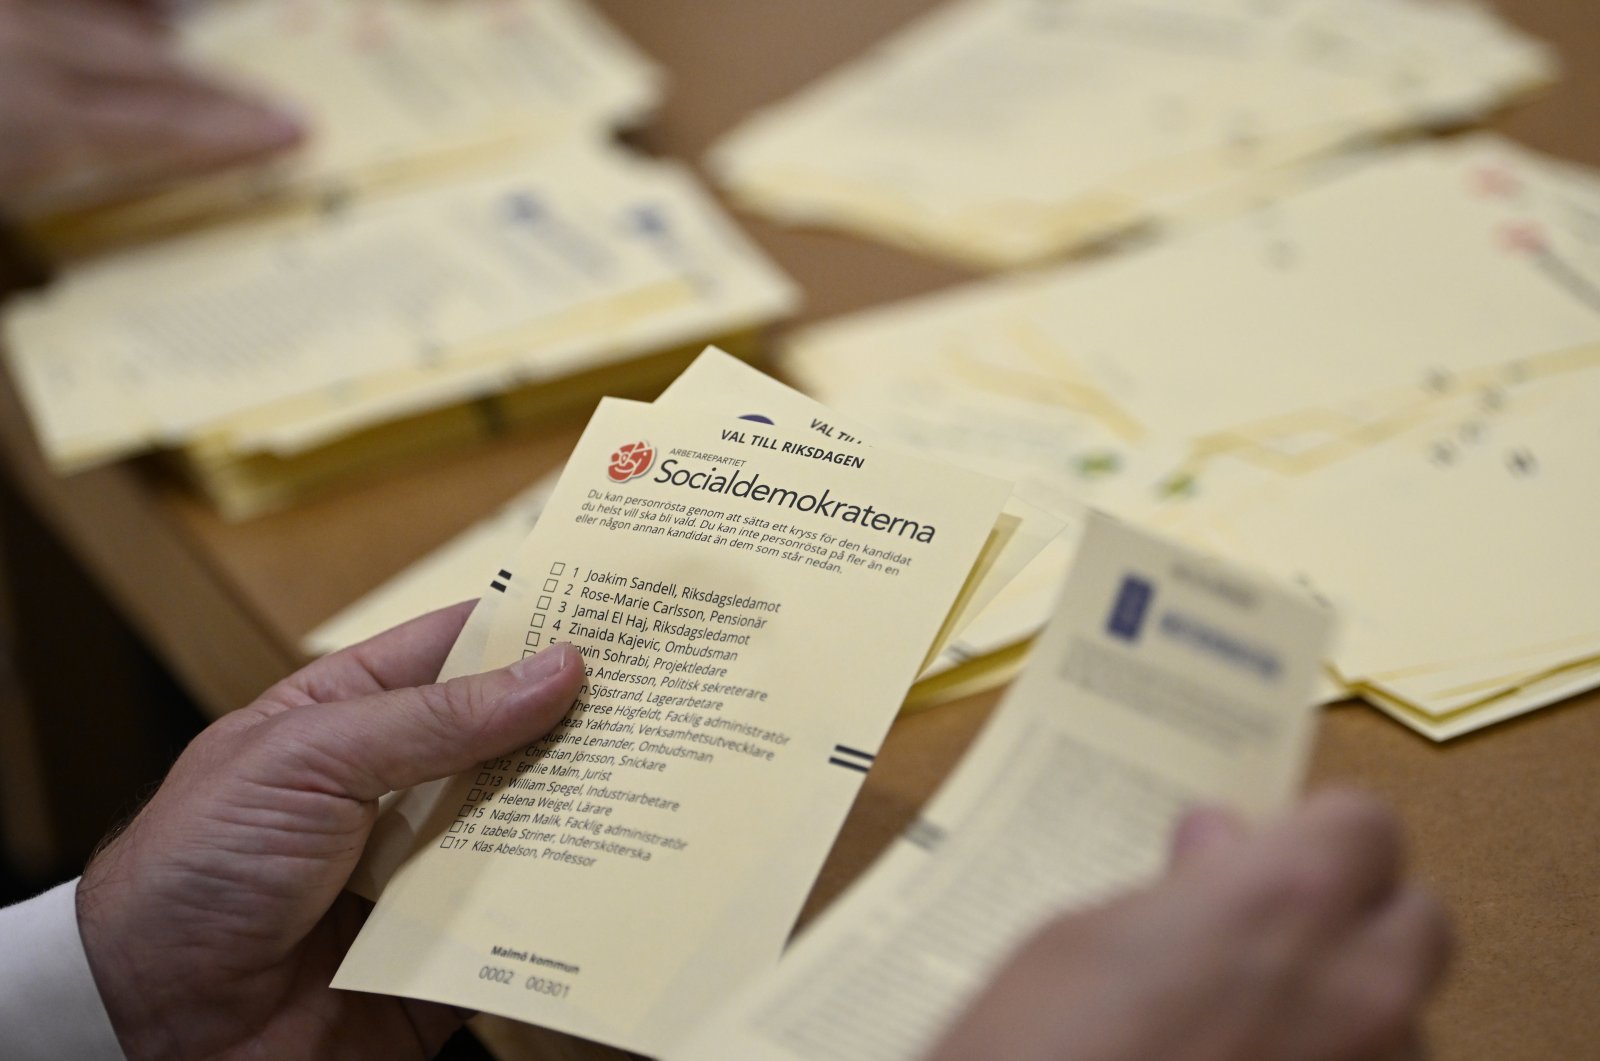 Poll workers count votes at a polling station at Hästhagens Sport Center in Malmö, Sweden, Sunday, Sept. 11, 2022. (Johan Nilsson/TT News Agency via AP)